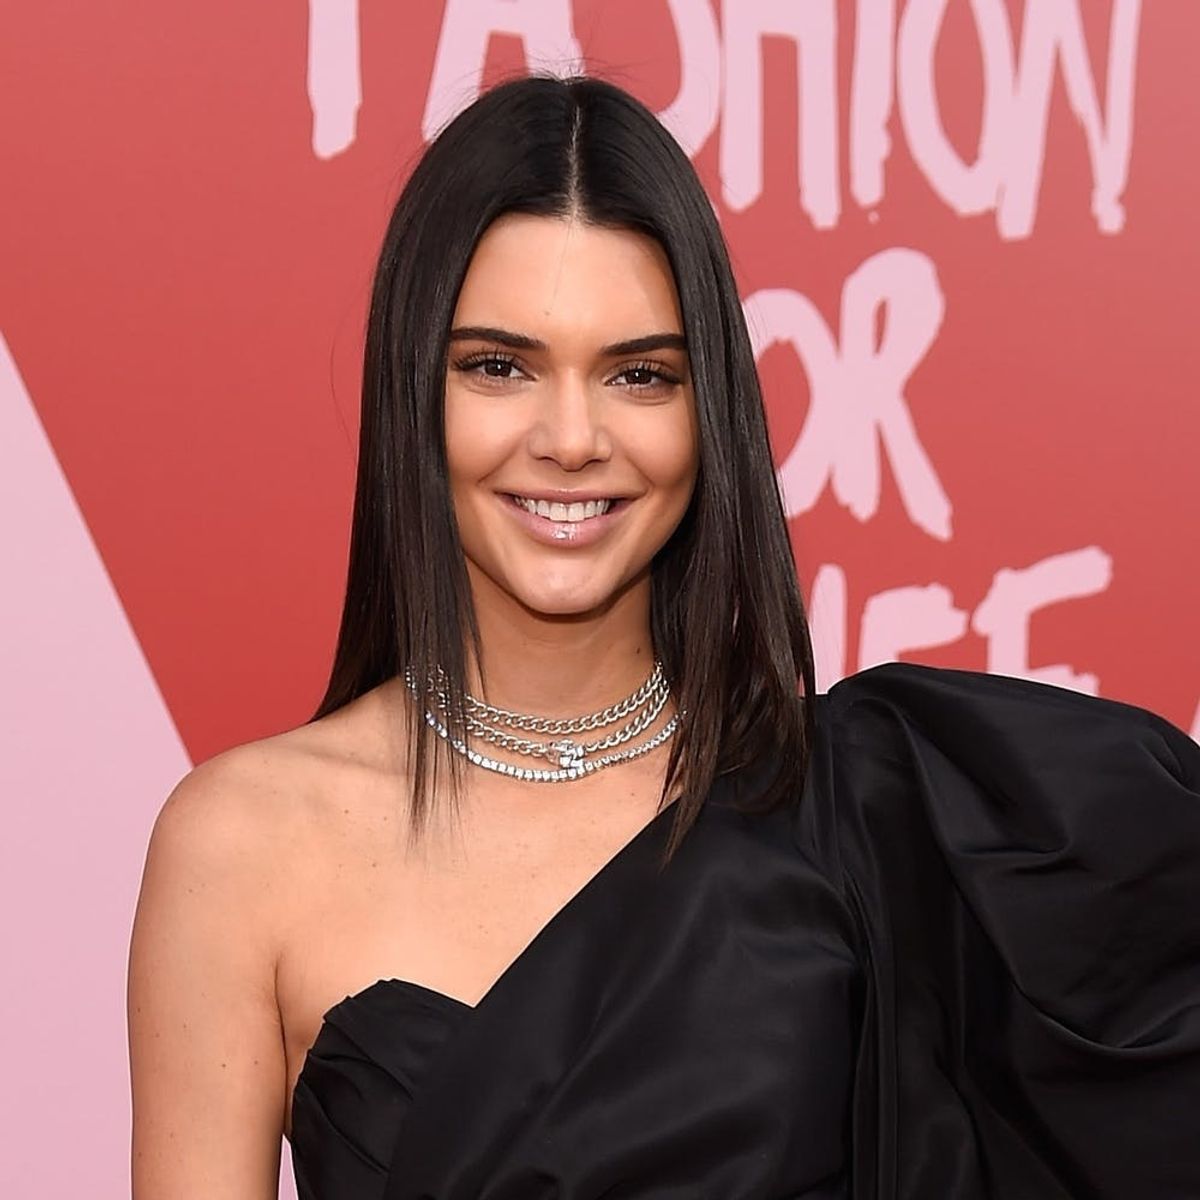 Kendall Jenner Was Spotted Wearing… an Engagement Ring?